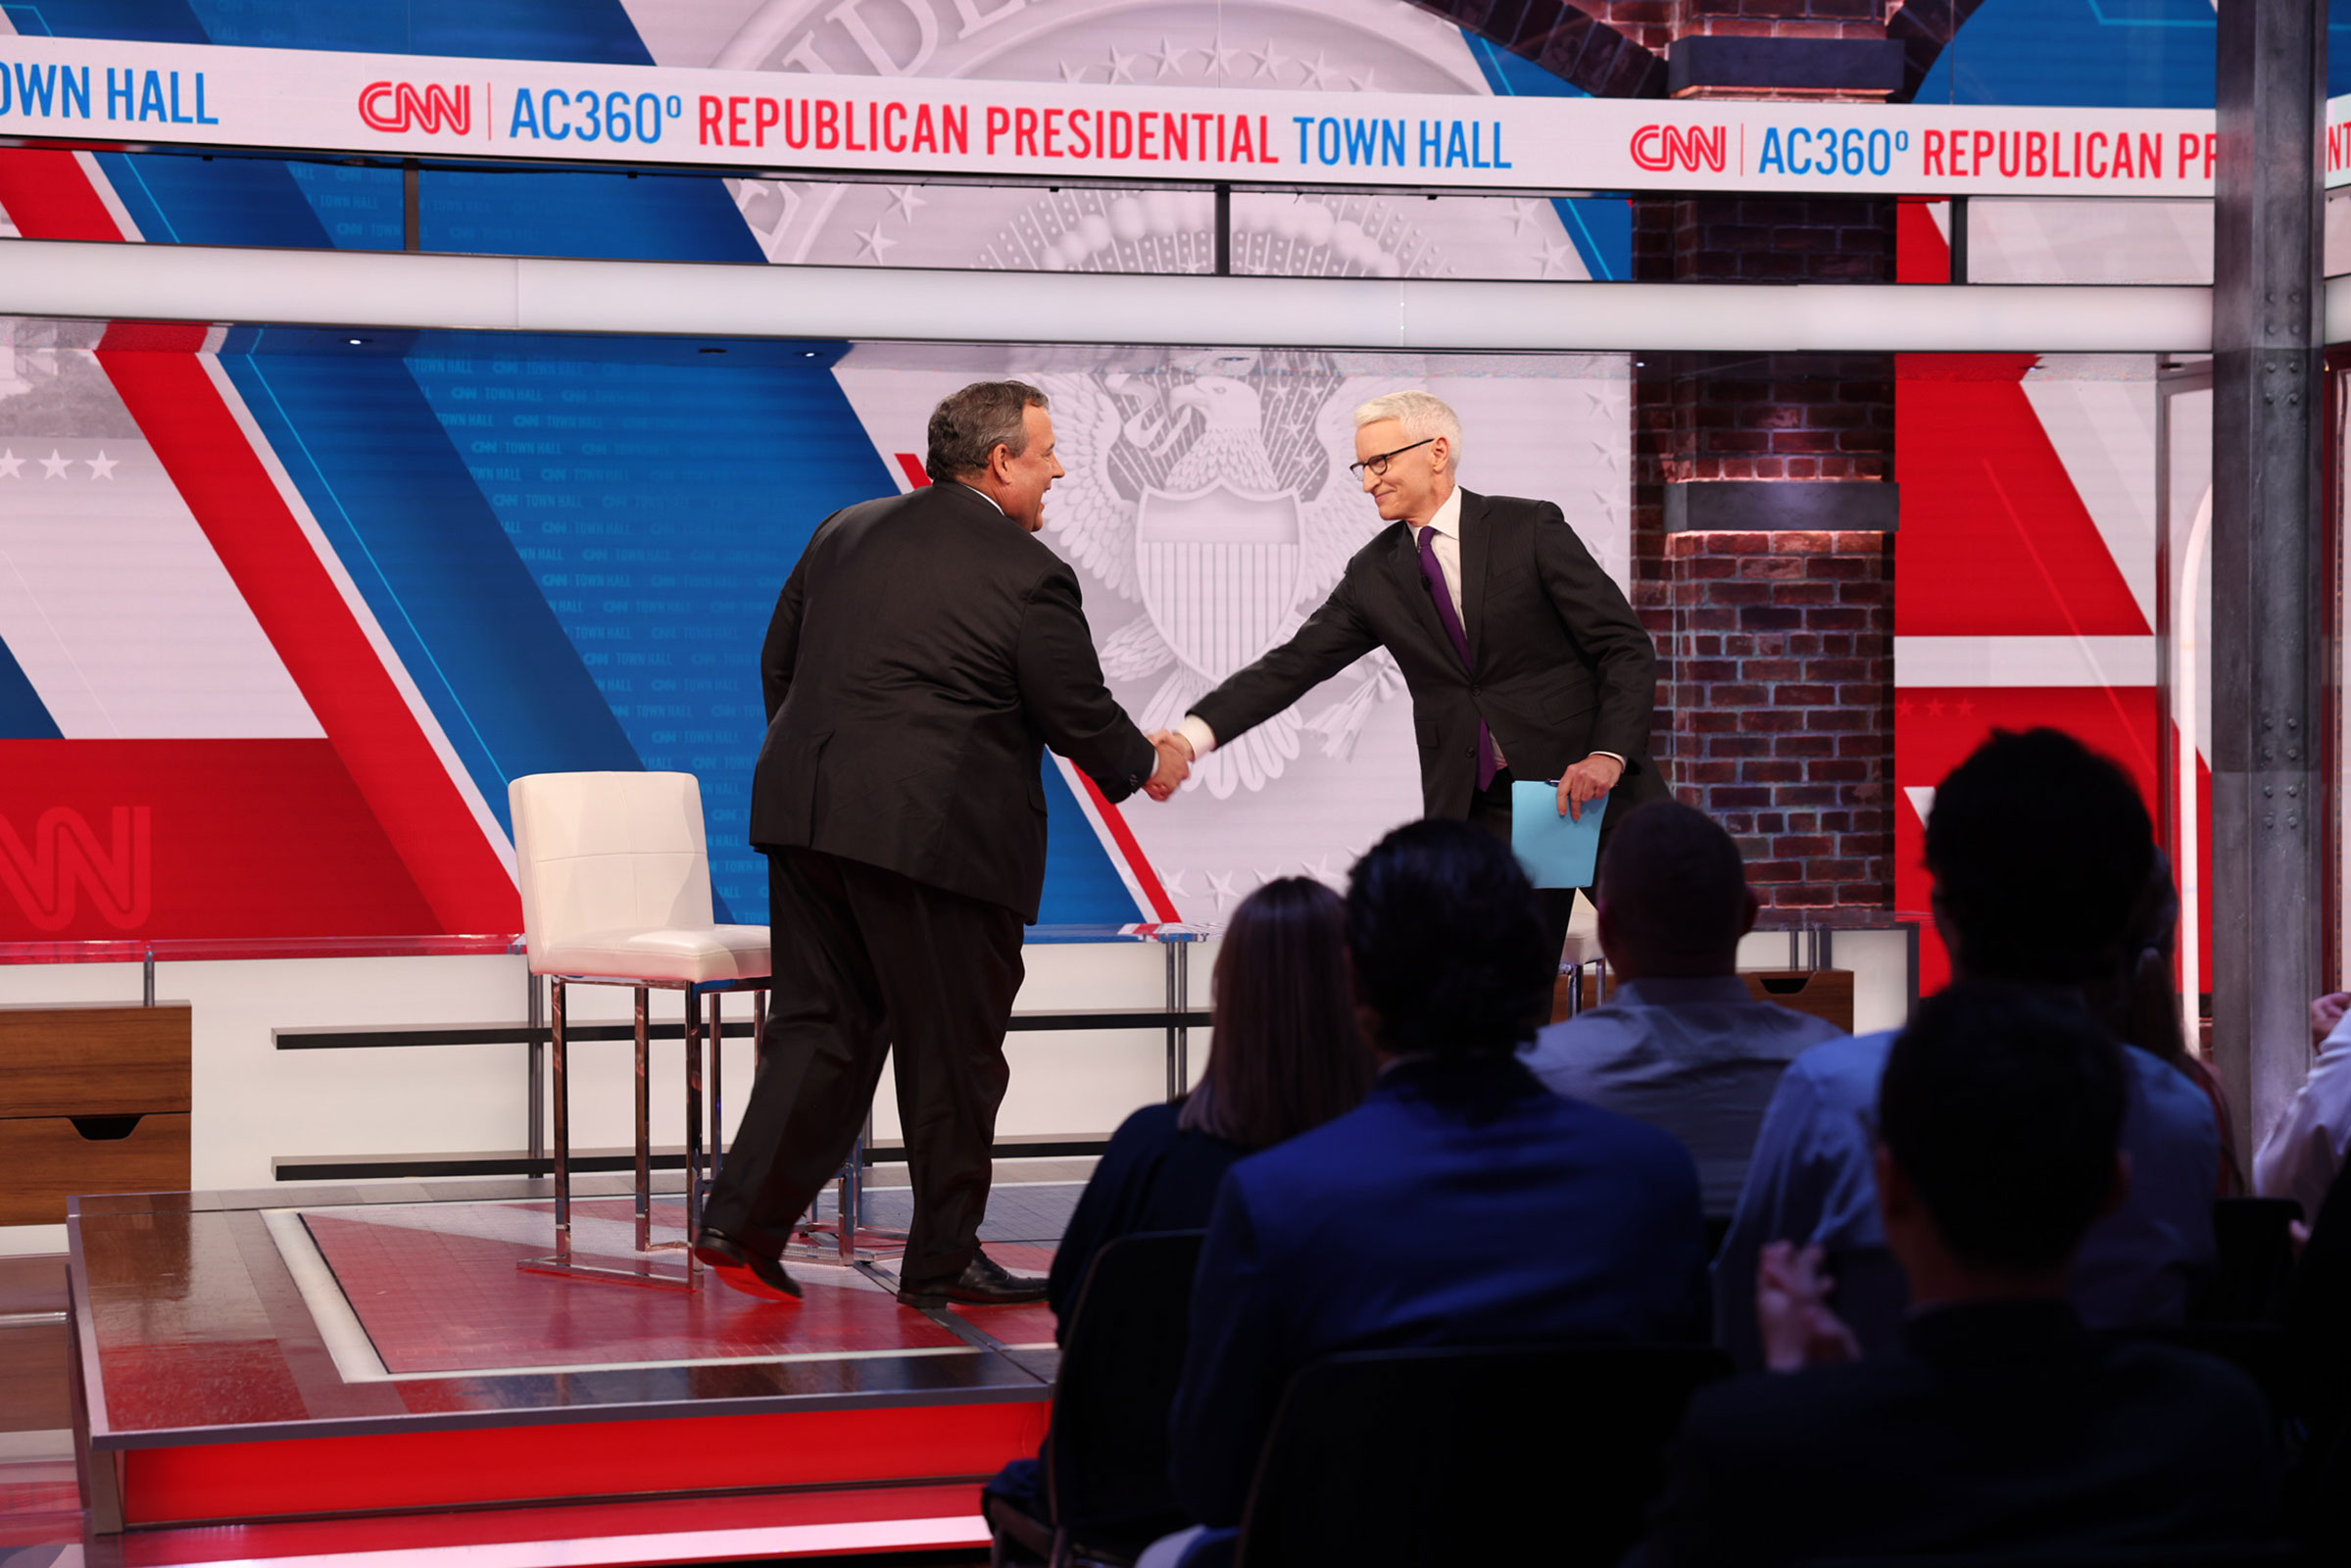 Former New Jersey Governor shakes hands with CNN's Anderson Cooper at the start of a CNN Republican Presidential Town Hall in New York on Monday, June 12.